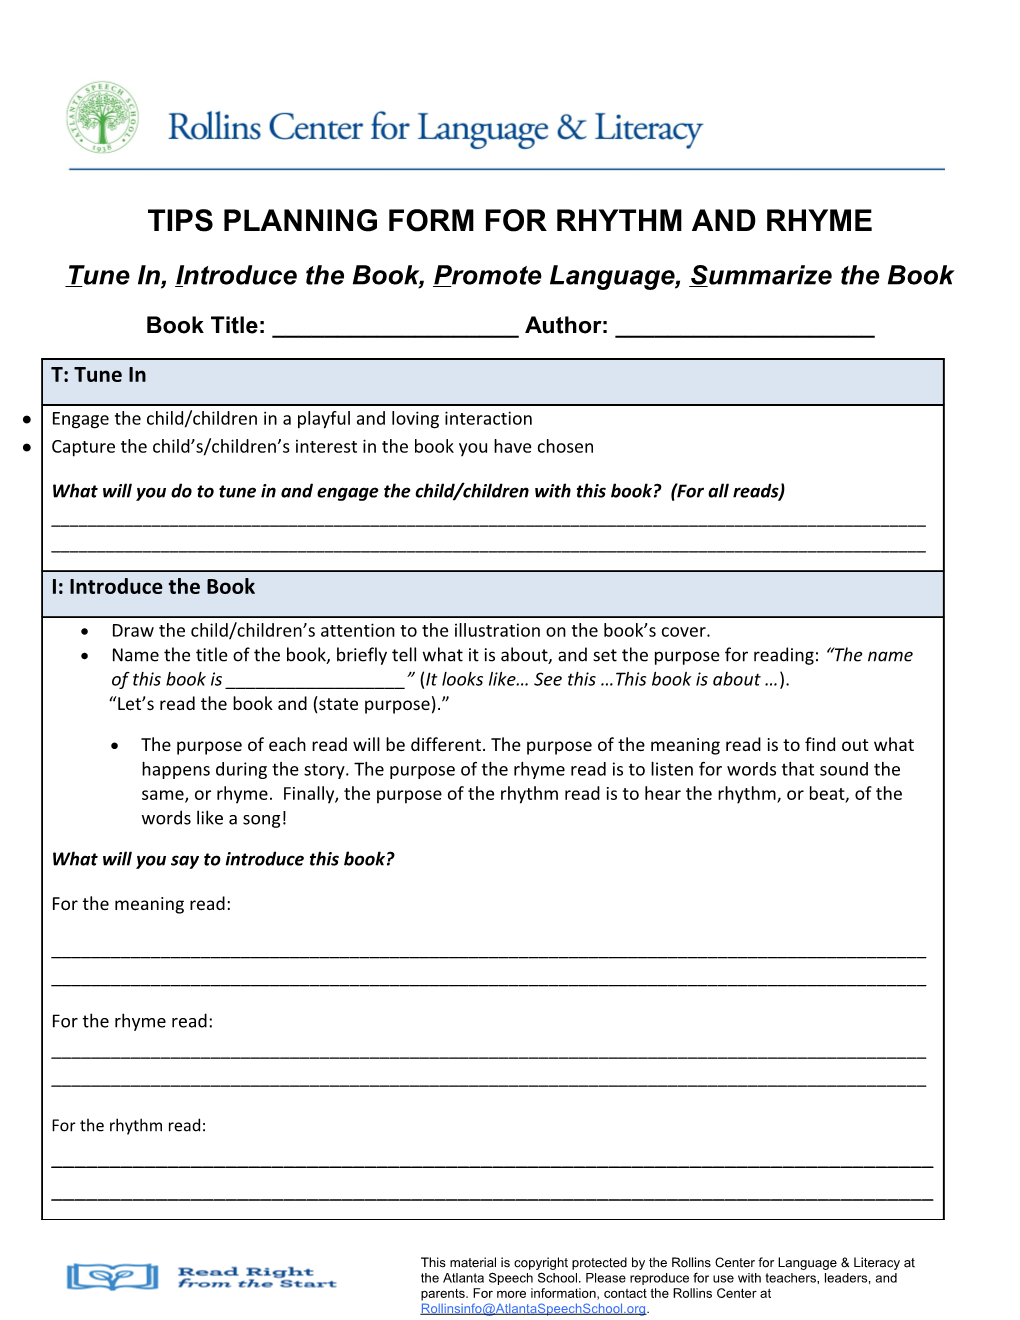 Tips Planning Form for Rhythm and Rhyme